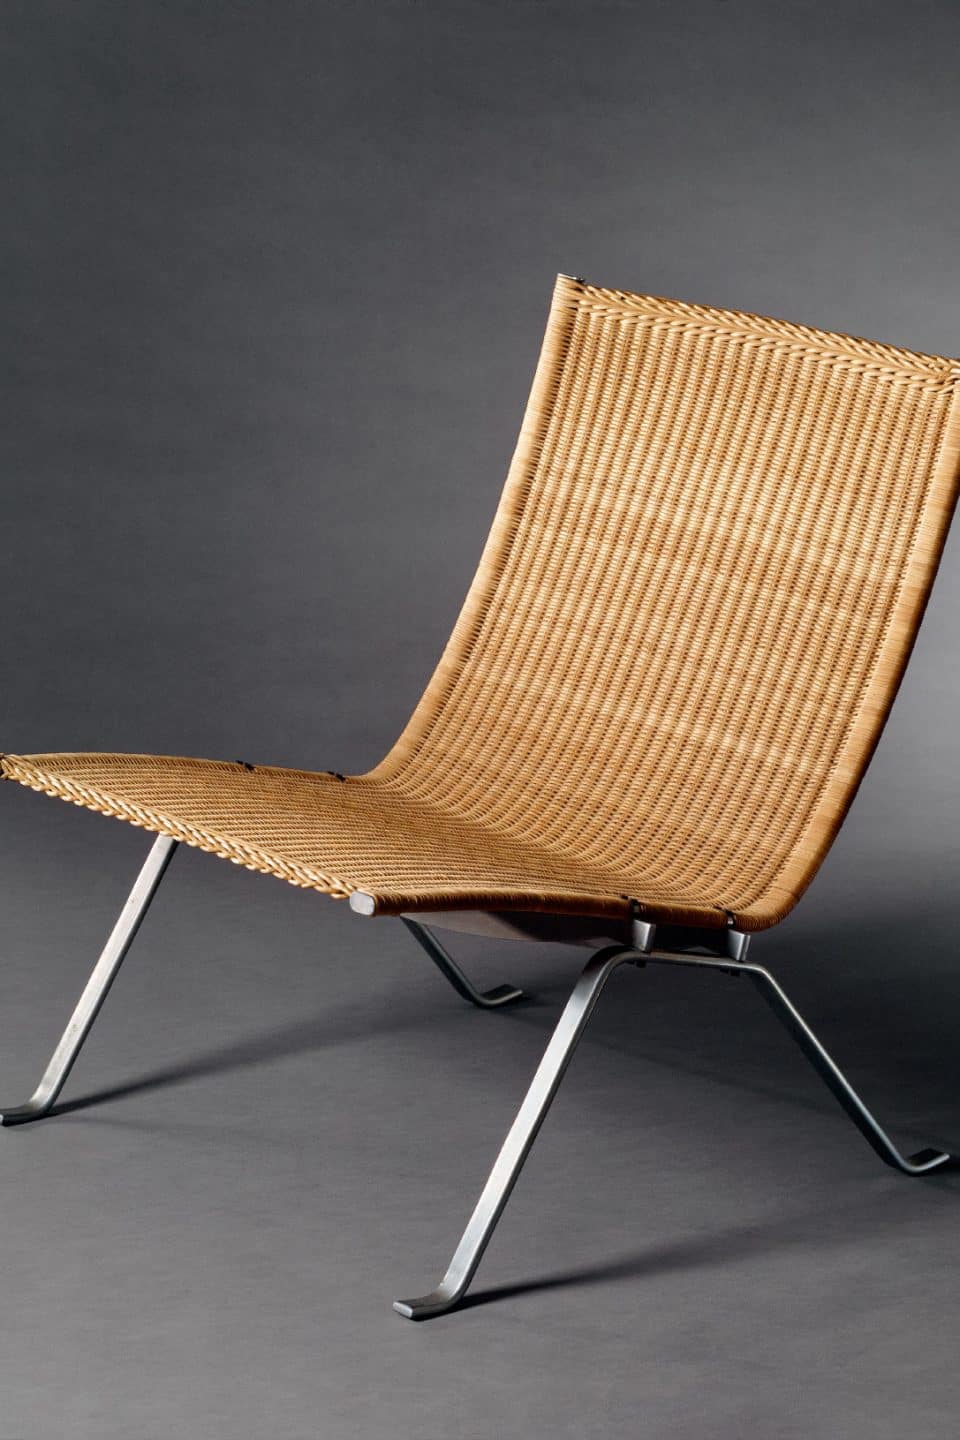 113 Chairs That Prove Danish Design Isn’t Limited to Denmark